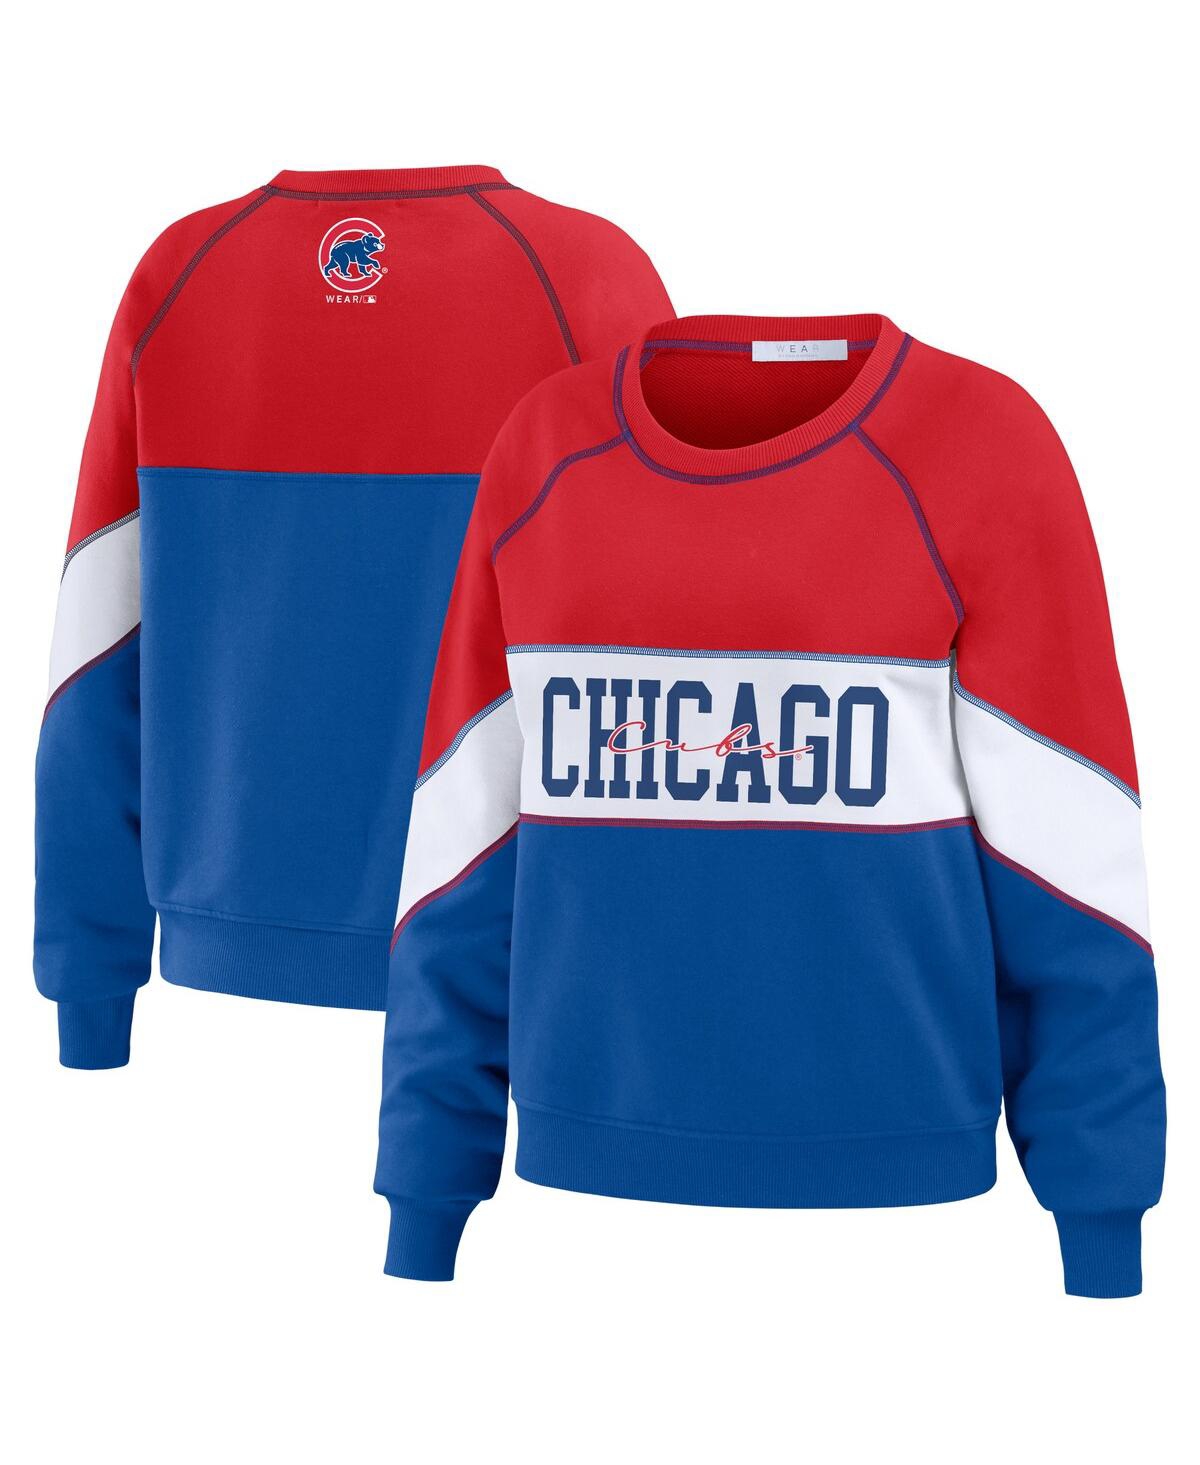 Women's Wear by Erin Andrews Red, Royal Chicago Cubs Crewneck Pullover Sweatshirt - Red, Royal